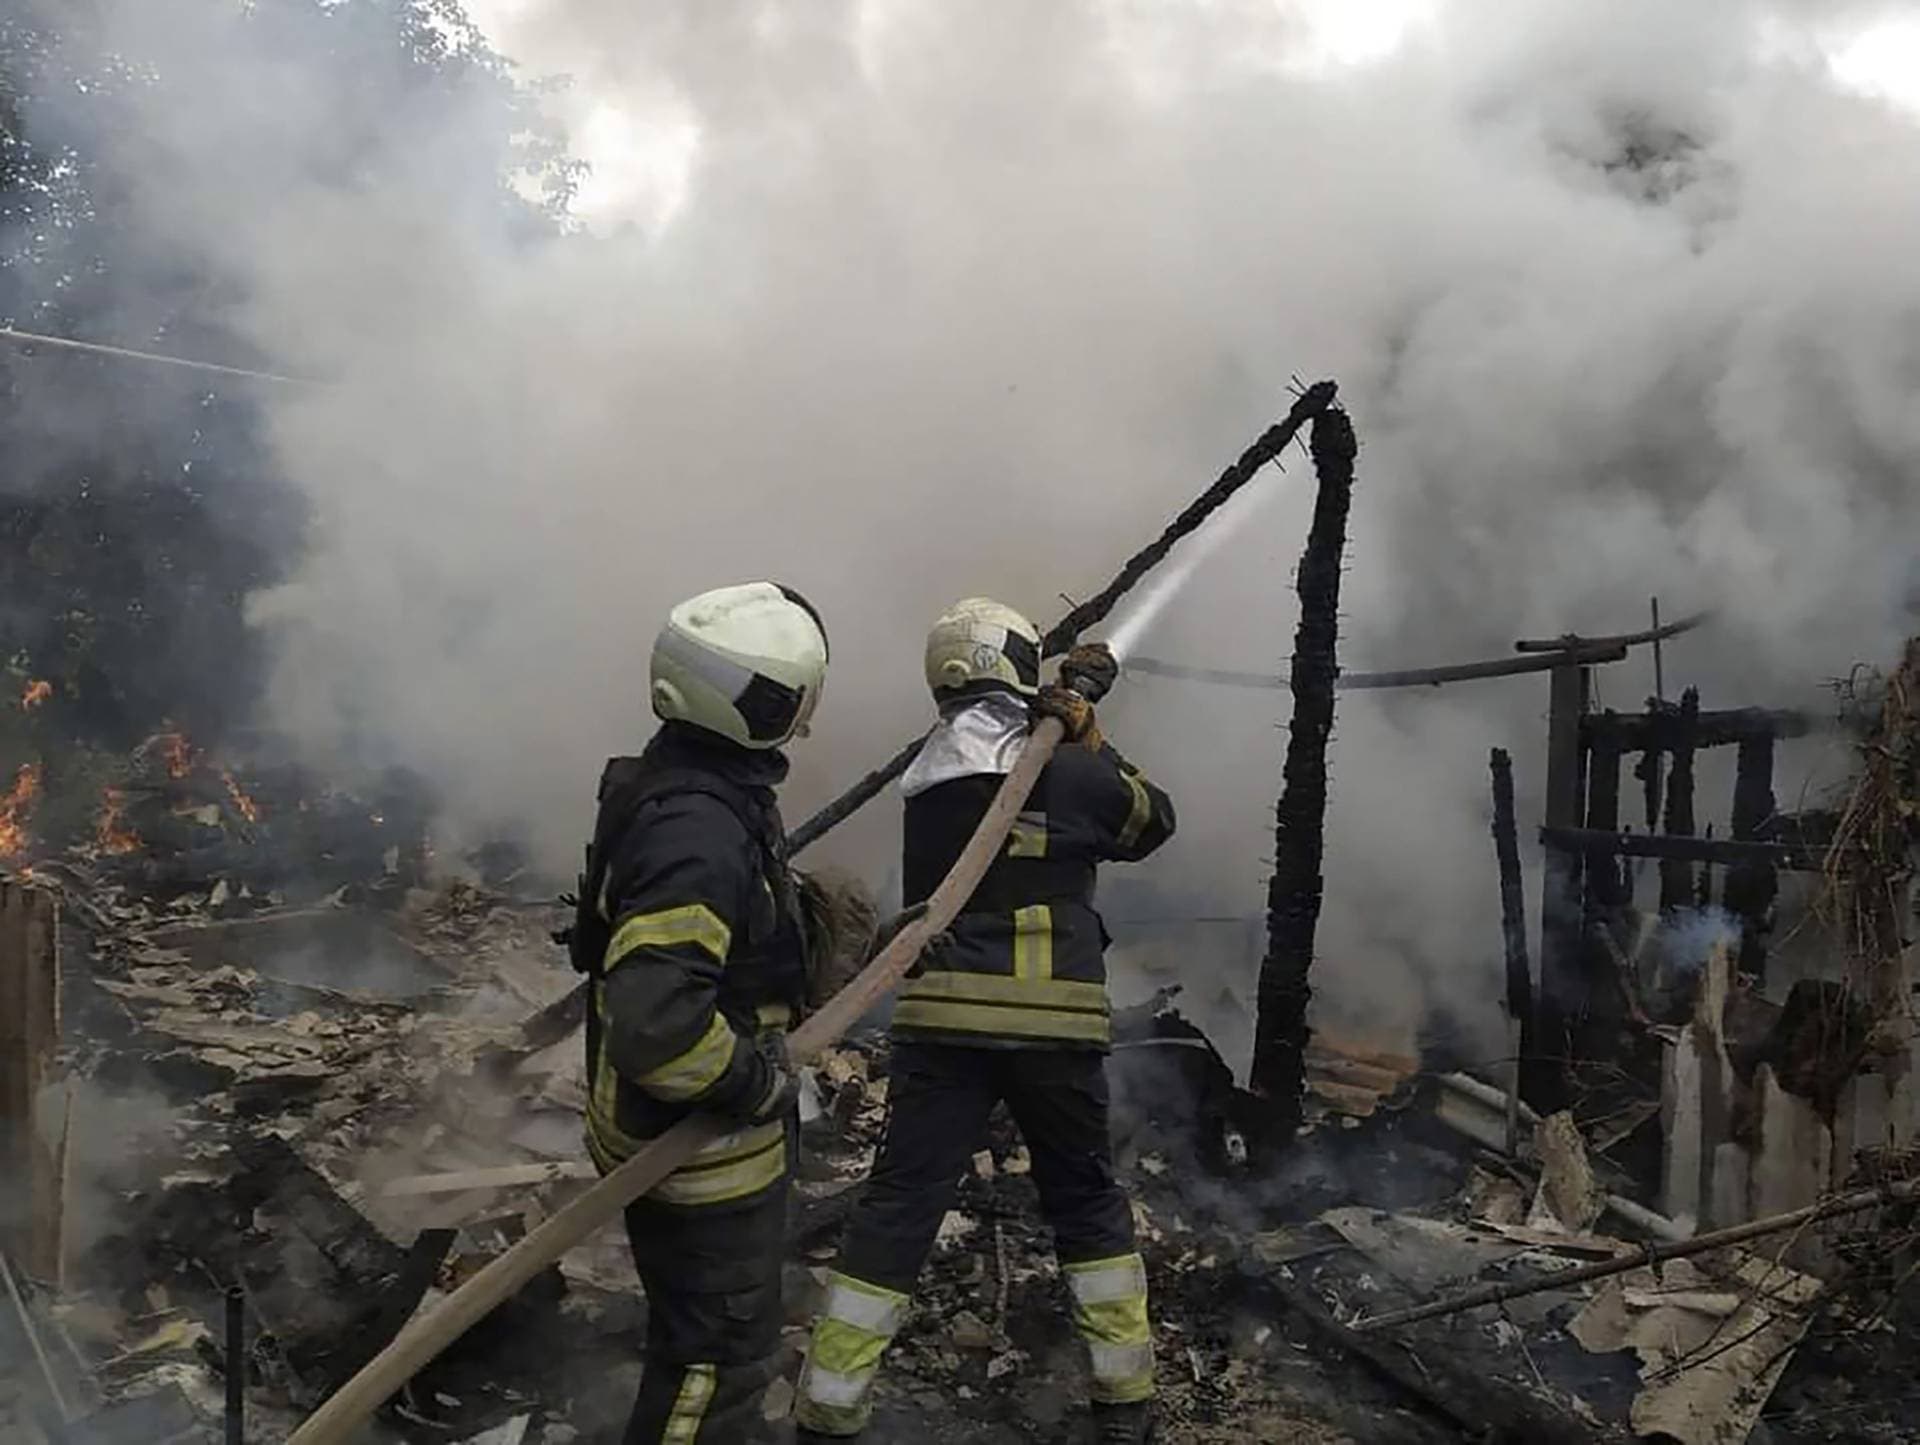 Ukrainian firefighters work to extinguish a fire at damaged residential building in Lysychansk